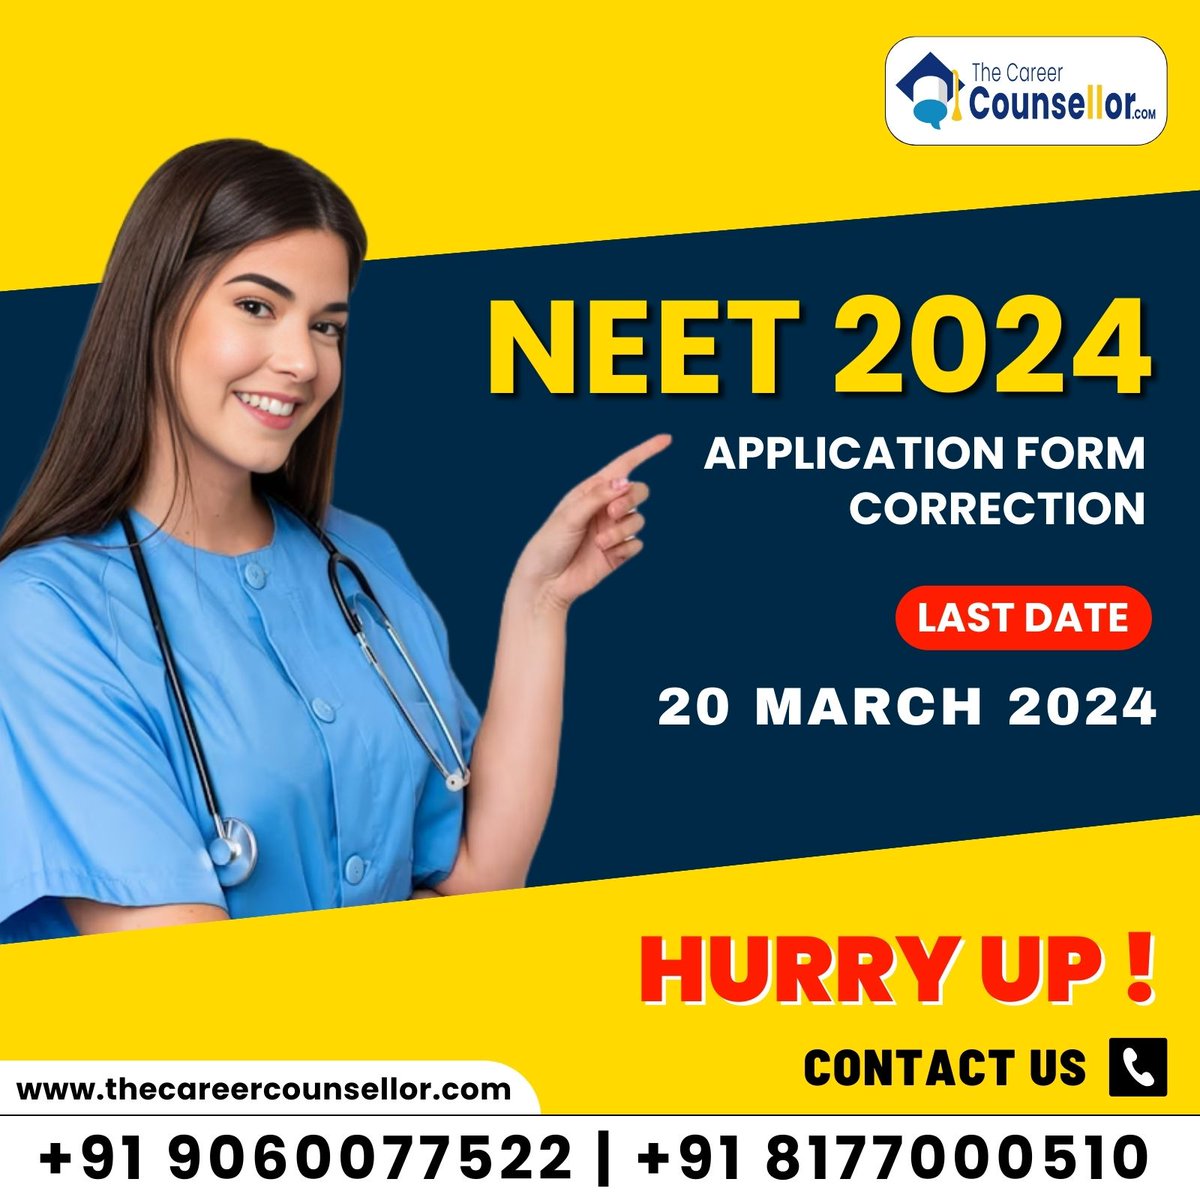 NEET UG Application Form Correction
Last Date- 20 March 2024
#neetugexam2024 #neetugregistration #neetugapplicationcorrection #neetug2024exam
#neetugapplicationcorrectiondate #ugcources #neetugcounselling #neetugadmission #NEET  #MedicalExams #Match2024 #thecareercounsellor